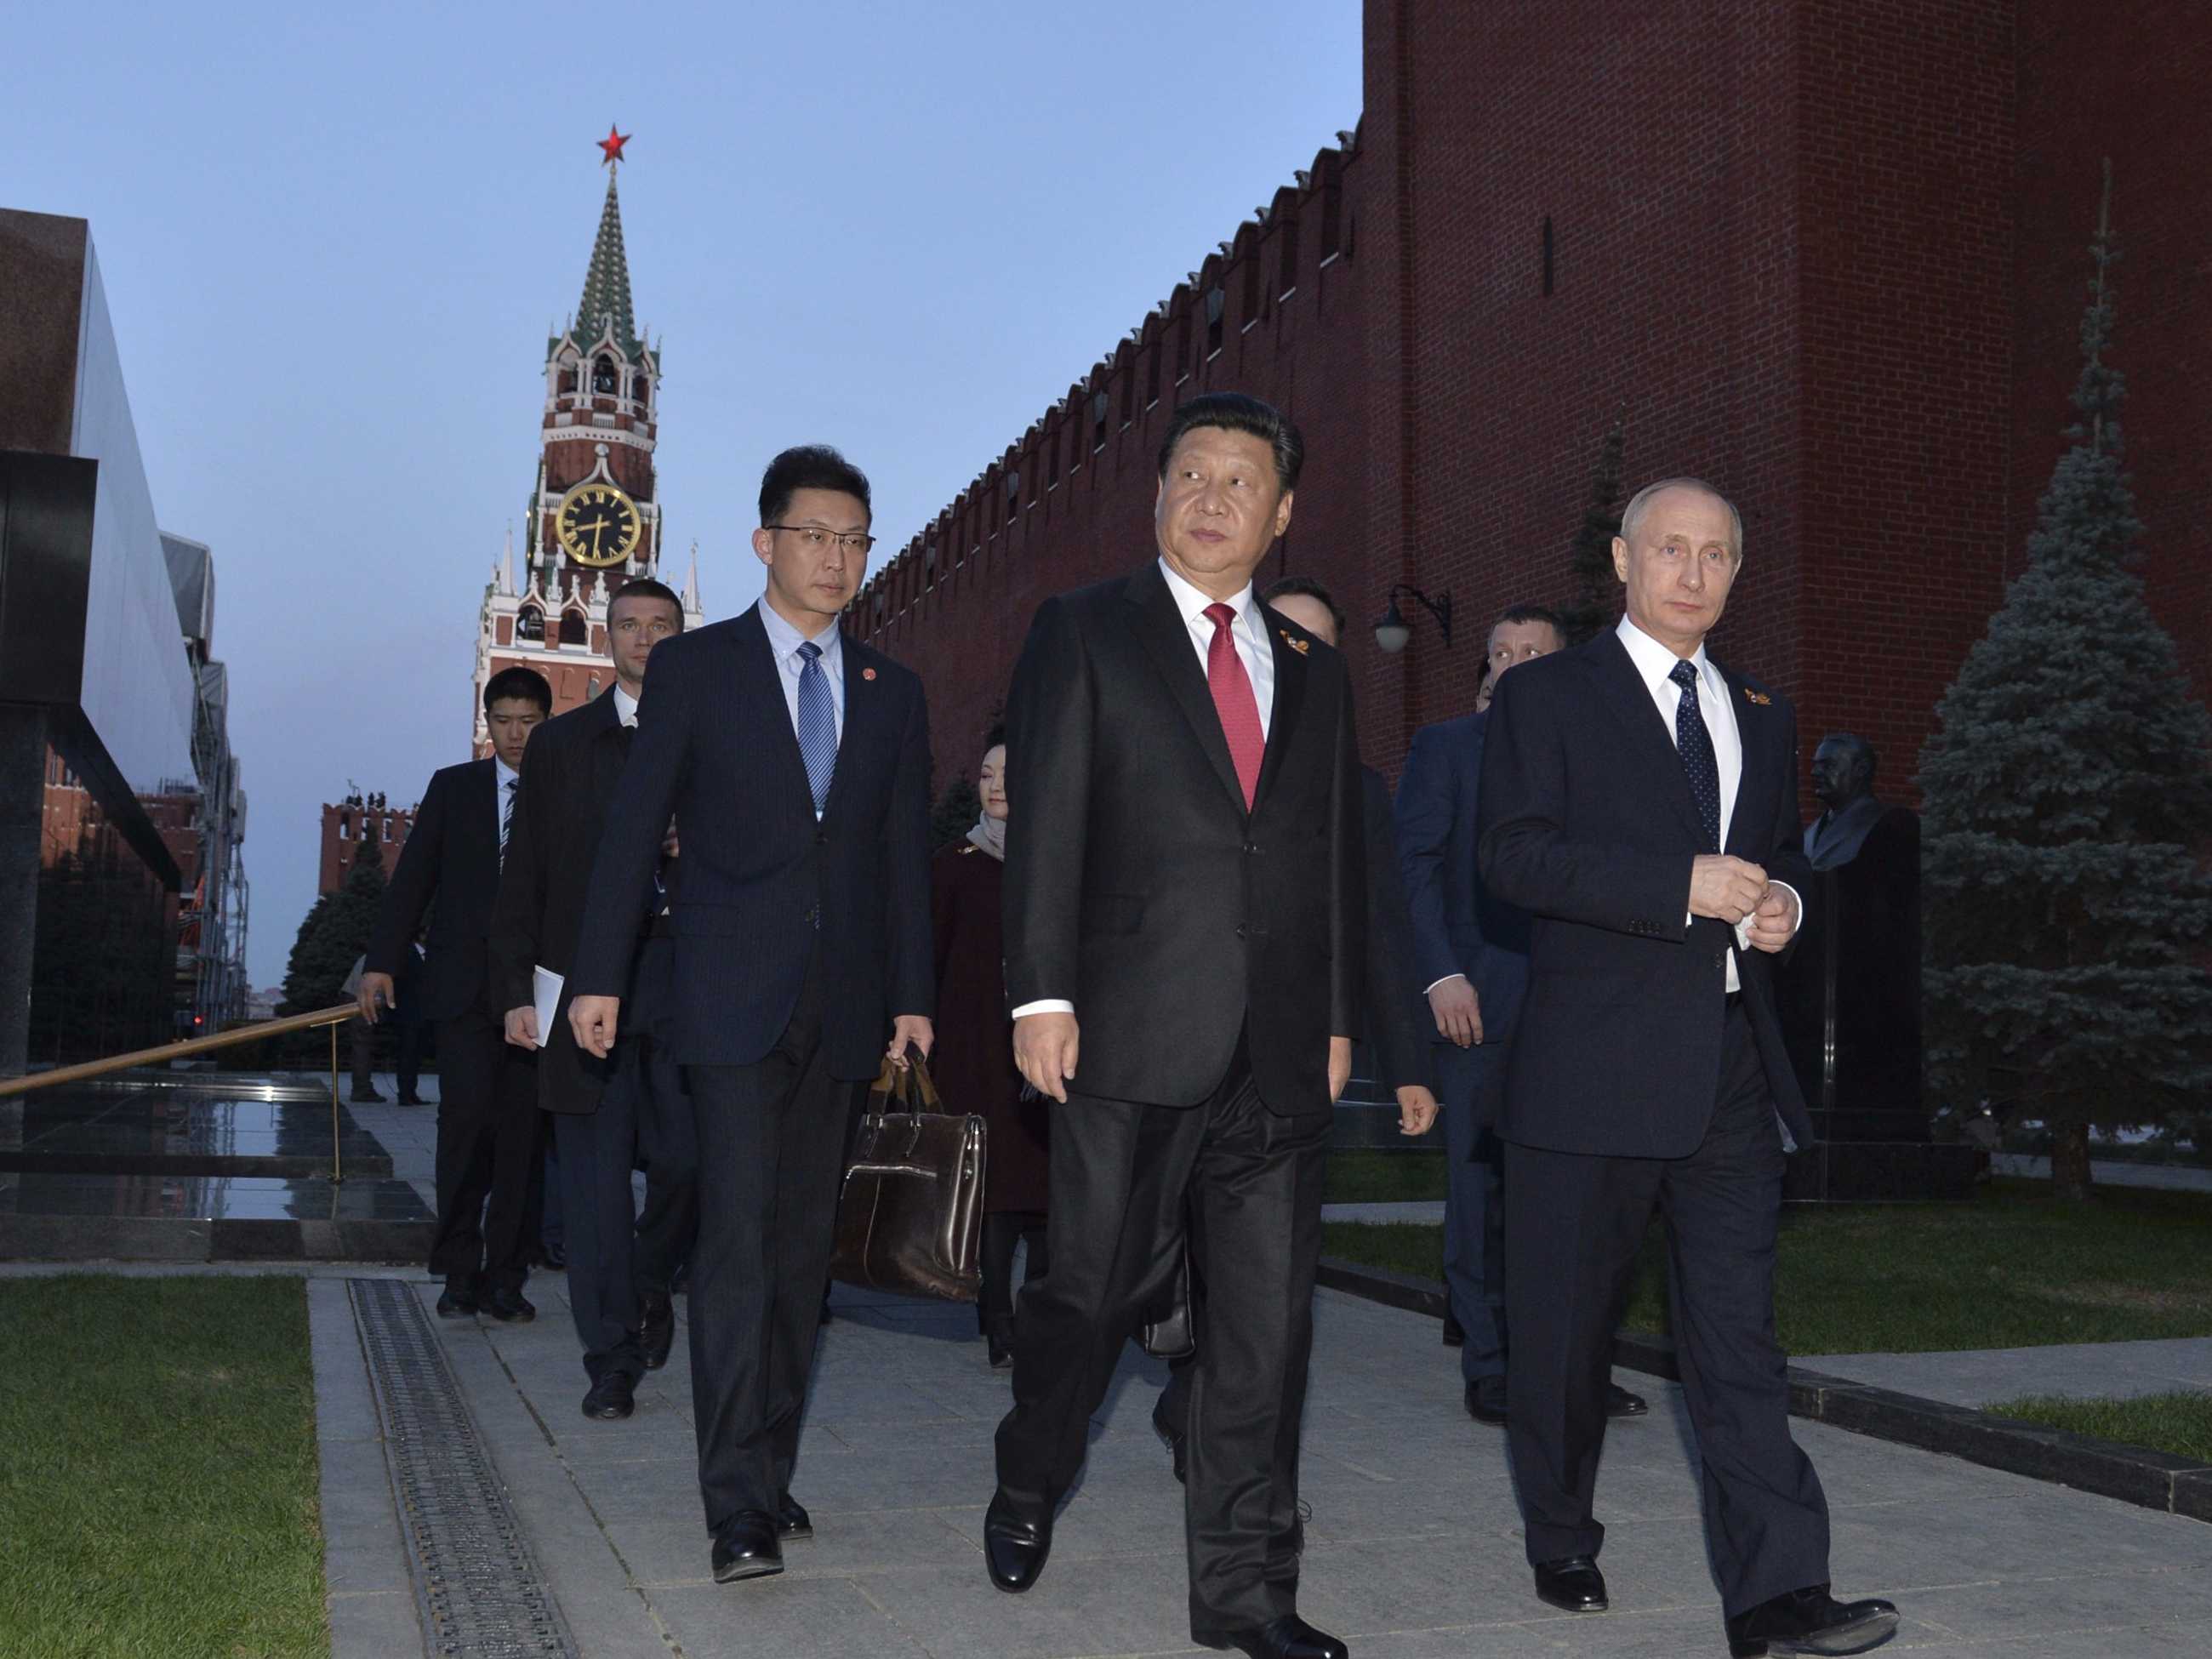 China has taken up Russia's deepest fear